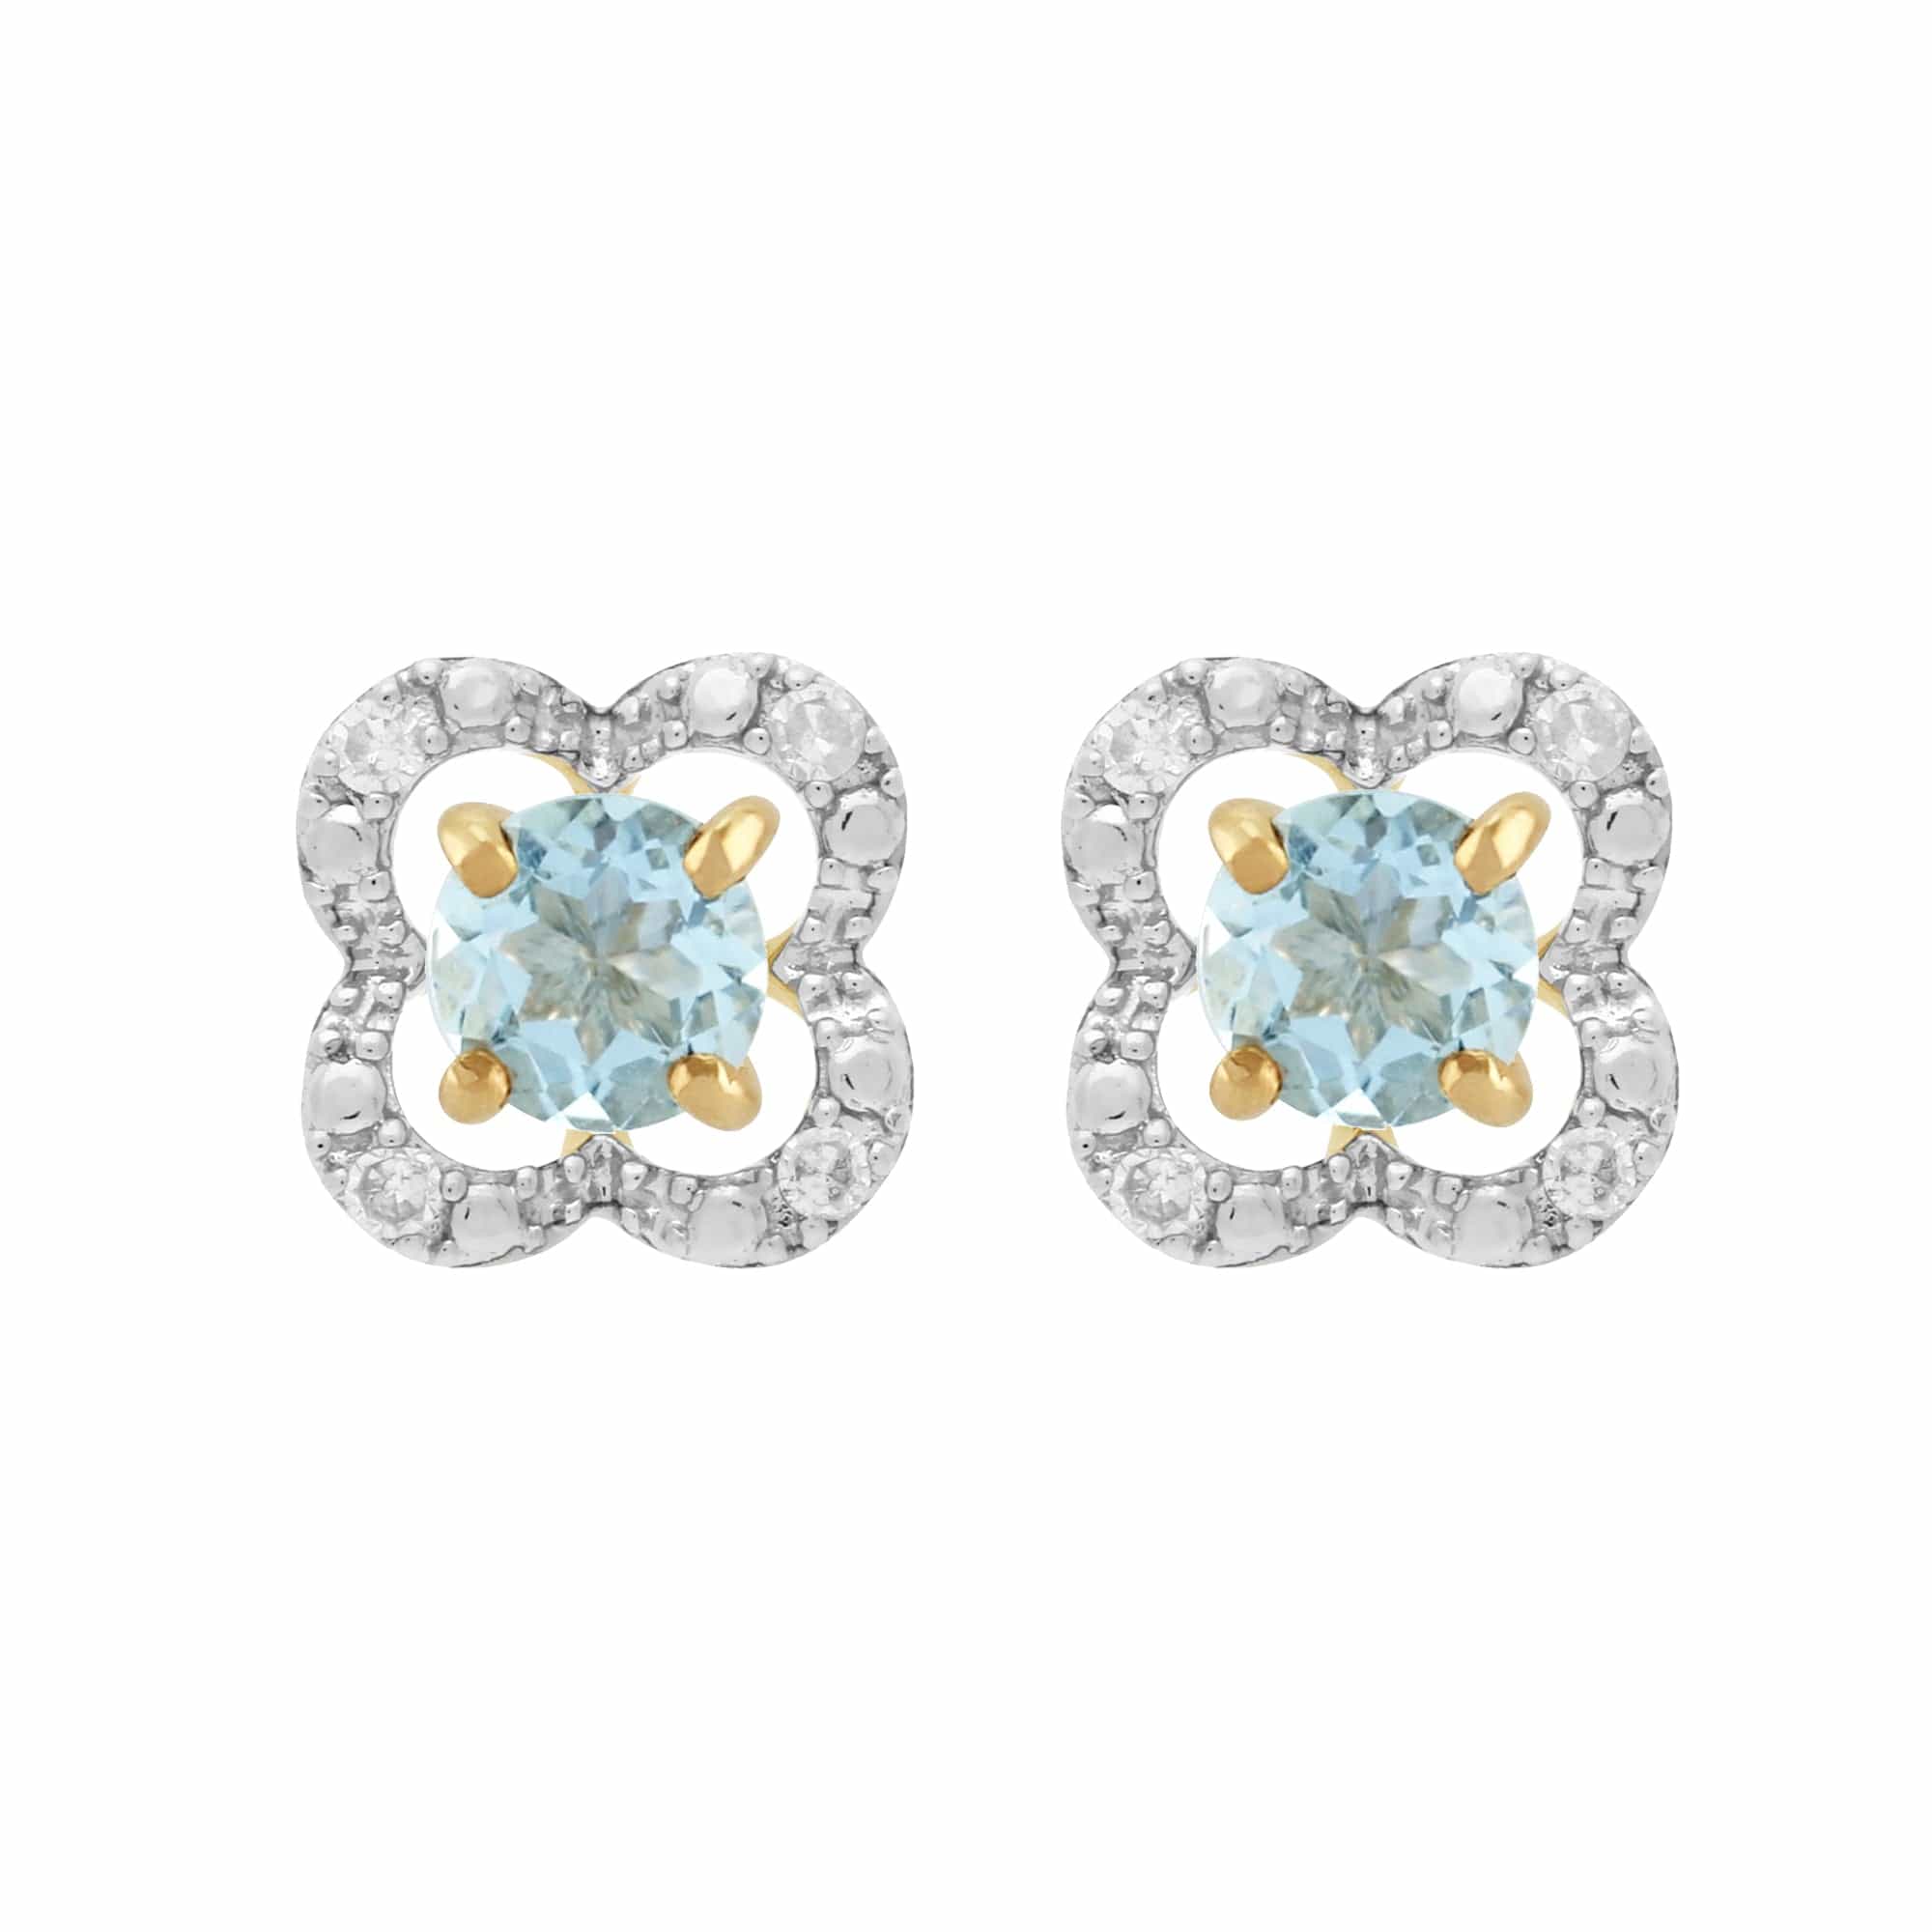 11567-191E0375019 Classic Round Aquamarine Stud Earrings with Detachable Diamond Floral Ear Jacket in 9ct Yellow Gold 1